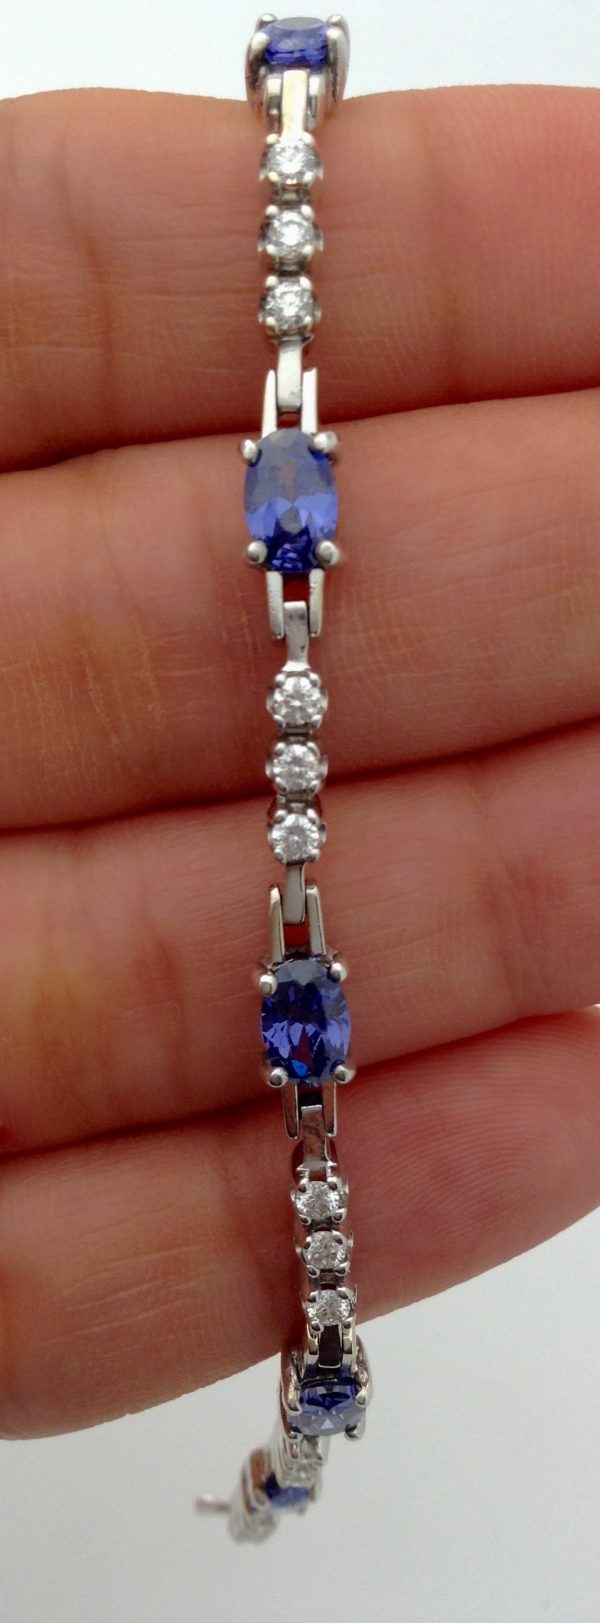 A person holding a 3.50 Ct Unheated Sapphire and 0.72 Ct Diamond Cocktail Tennis Bracelet 14k